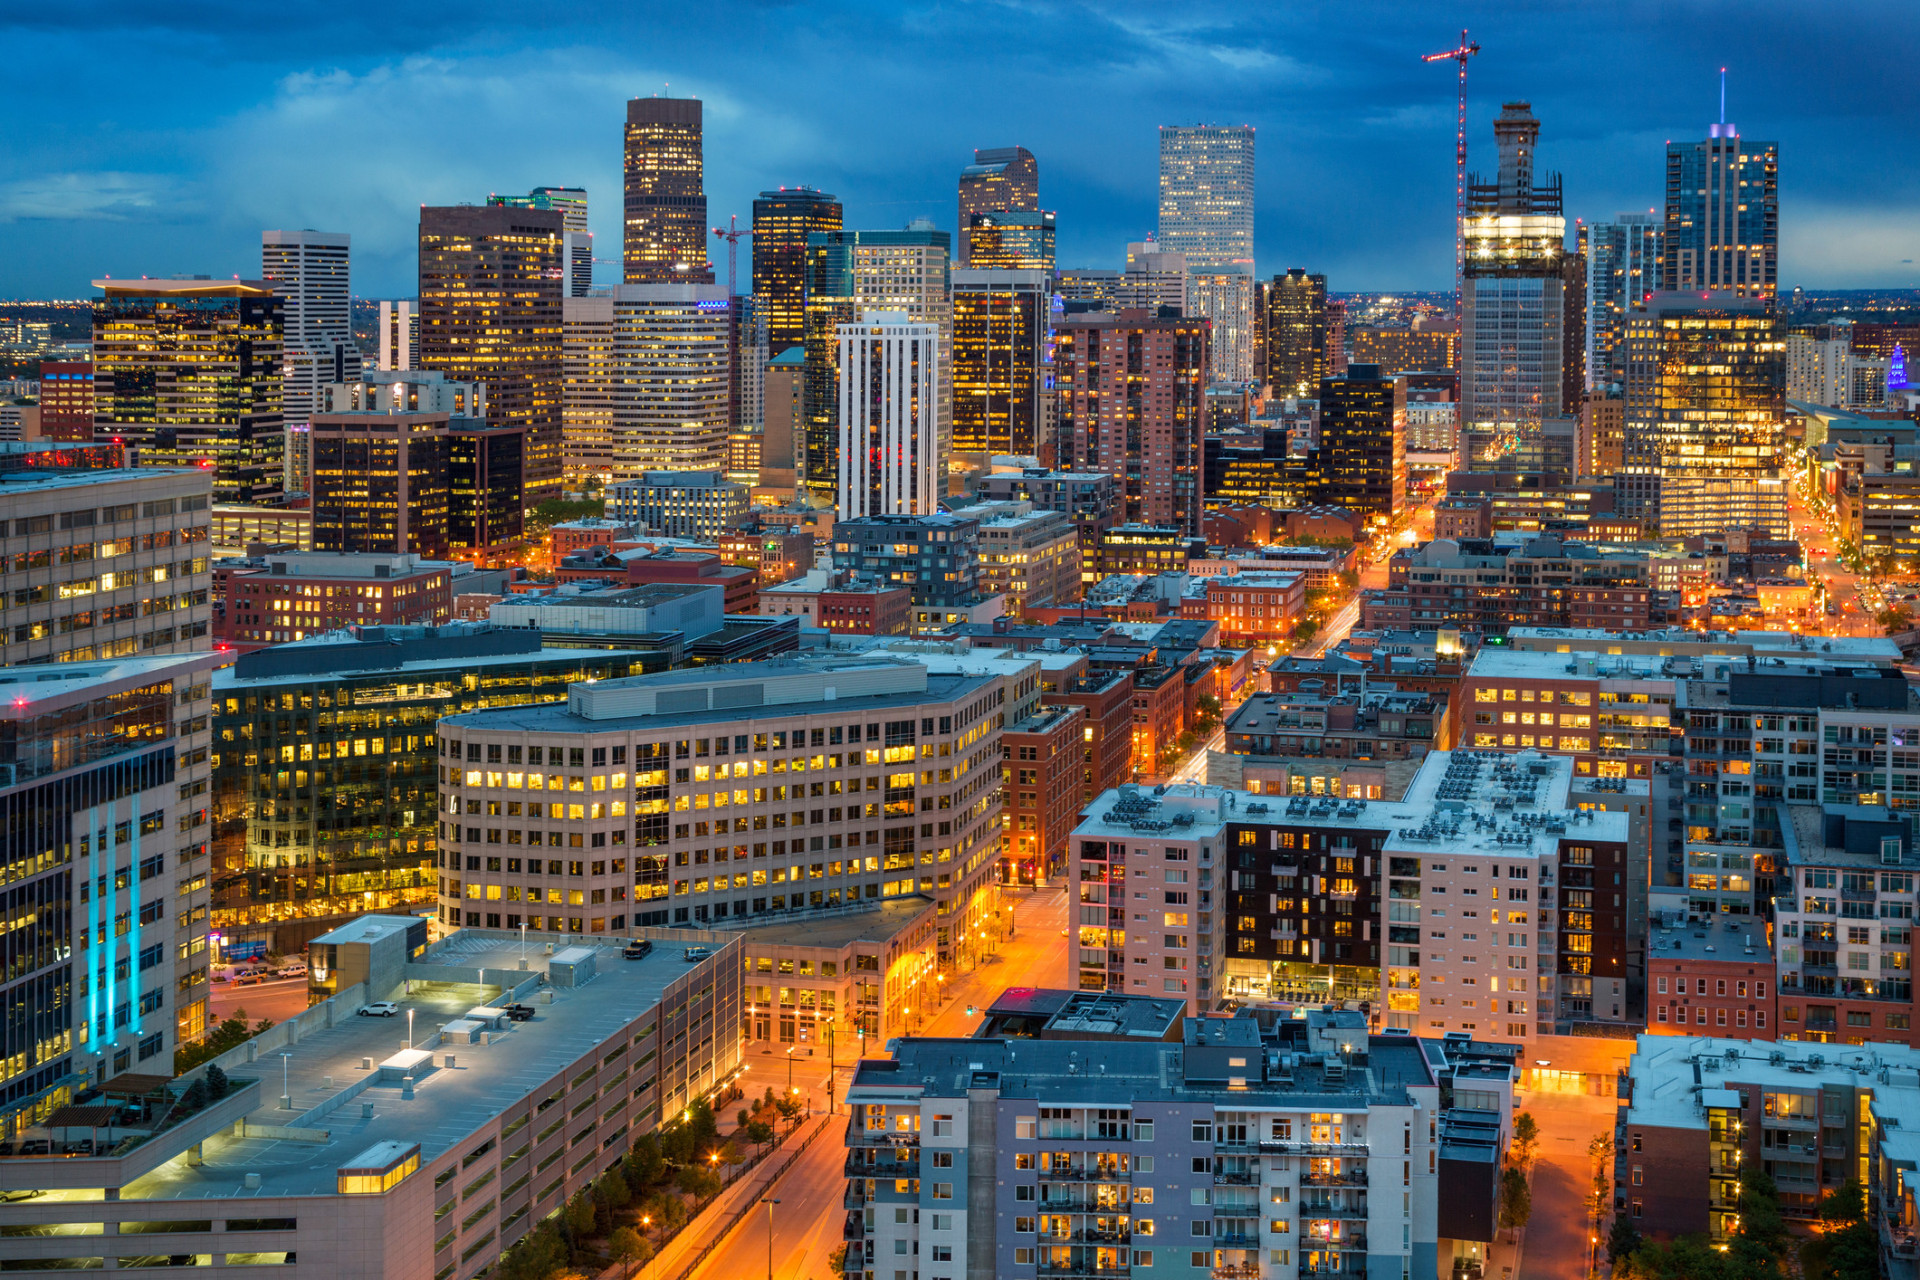 Nestled in the South Platte River valley of the Western United States is Denver, the 17th-most Googled travel destination. This city, nicknamed the "Mile High City" due to its elevation, hosts a plethora of museums and a glorious botanical garden.<p><a href="https://www.msn.com/en-us/community/channel/vid-7xx8mnucu55yw63we9va2gwr7uihbxwc68fxqp25x6tg4ftibpra?cvid=94631541bc0f4f89bfd59158d696ad7e">Follow us and access great exclusive content every day</a></p>